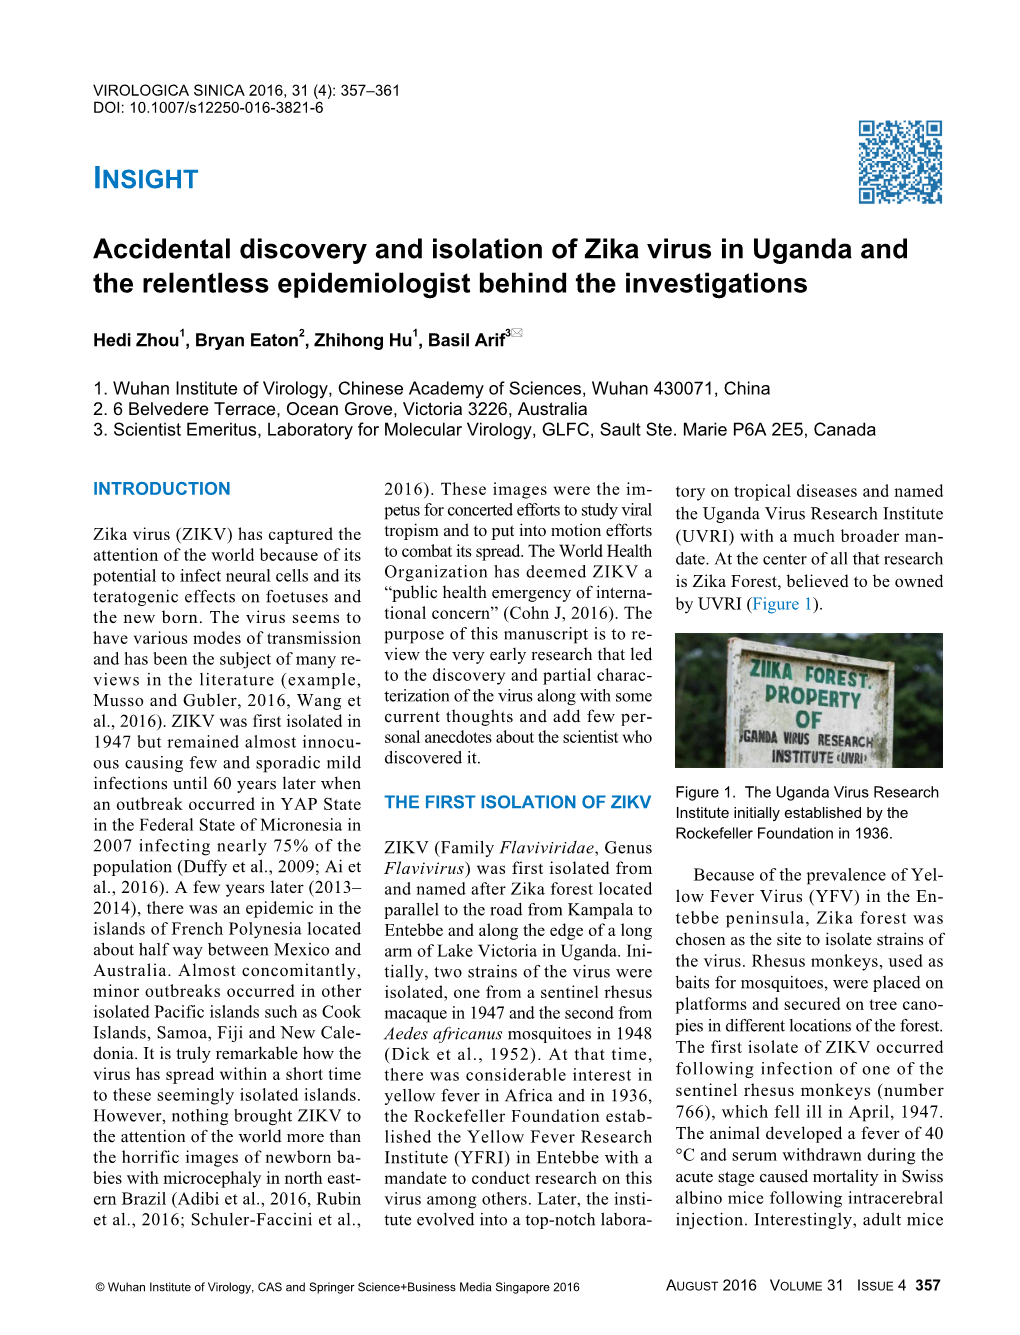 Accidental Discovery and Isolation of Zika Virus in Uganda and the Relentless Epidemiologist Behind the Investigations